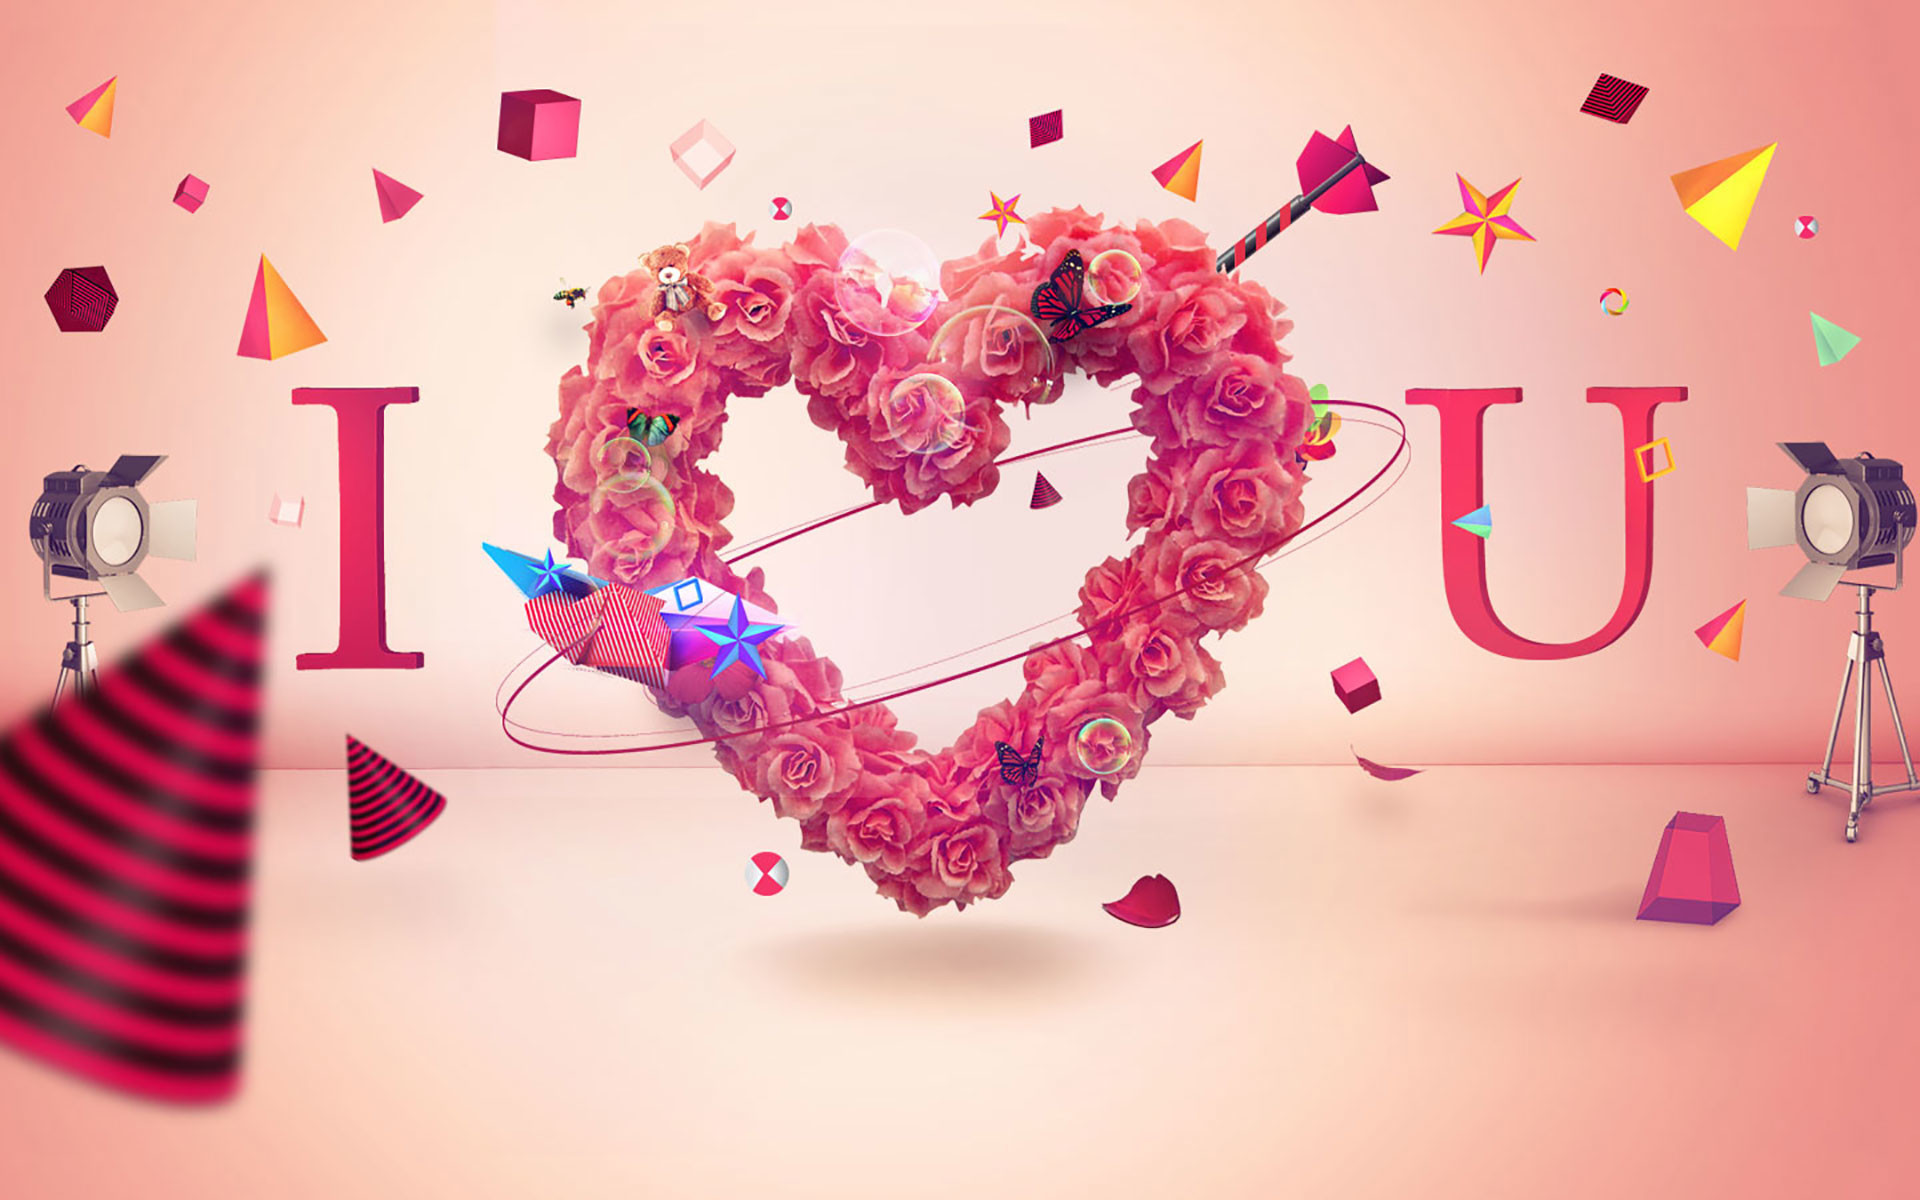 1920x1200 Wallpaper I Love You Group with items | HD Wallpapers | Pinterest |  Wallpaper, Hd wallpaper and Image collection